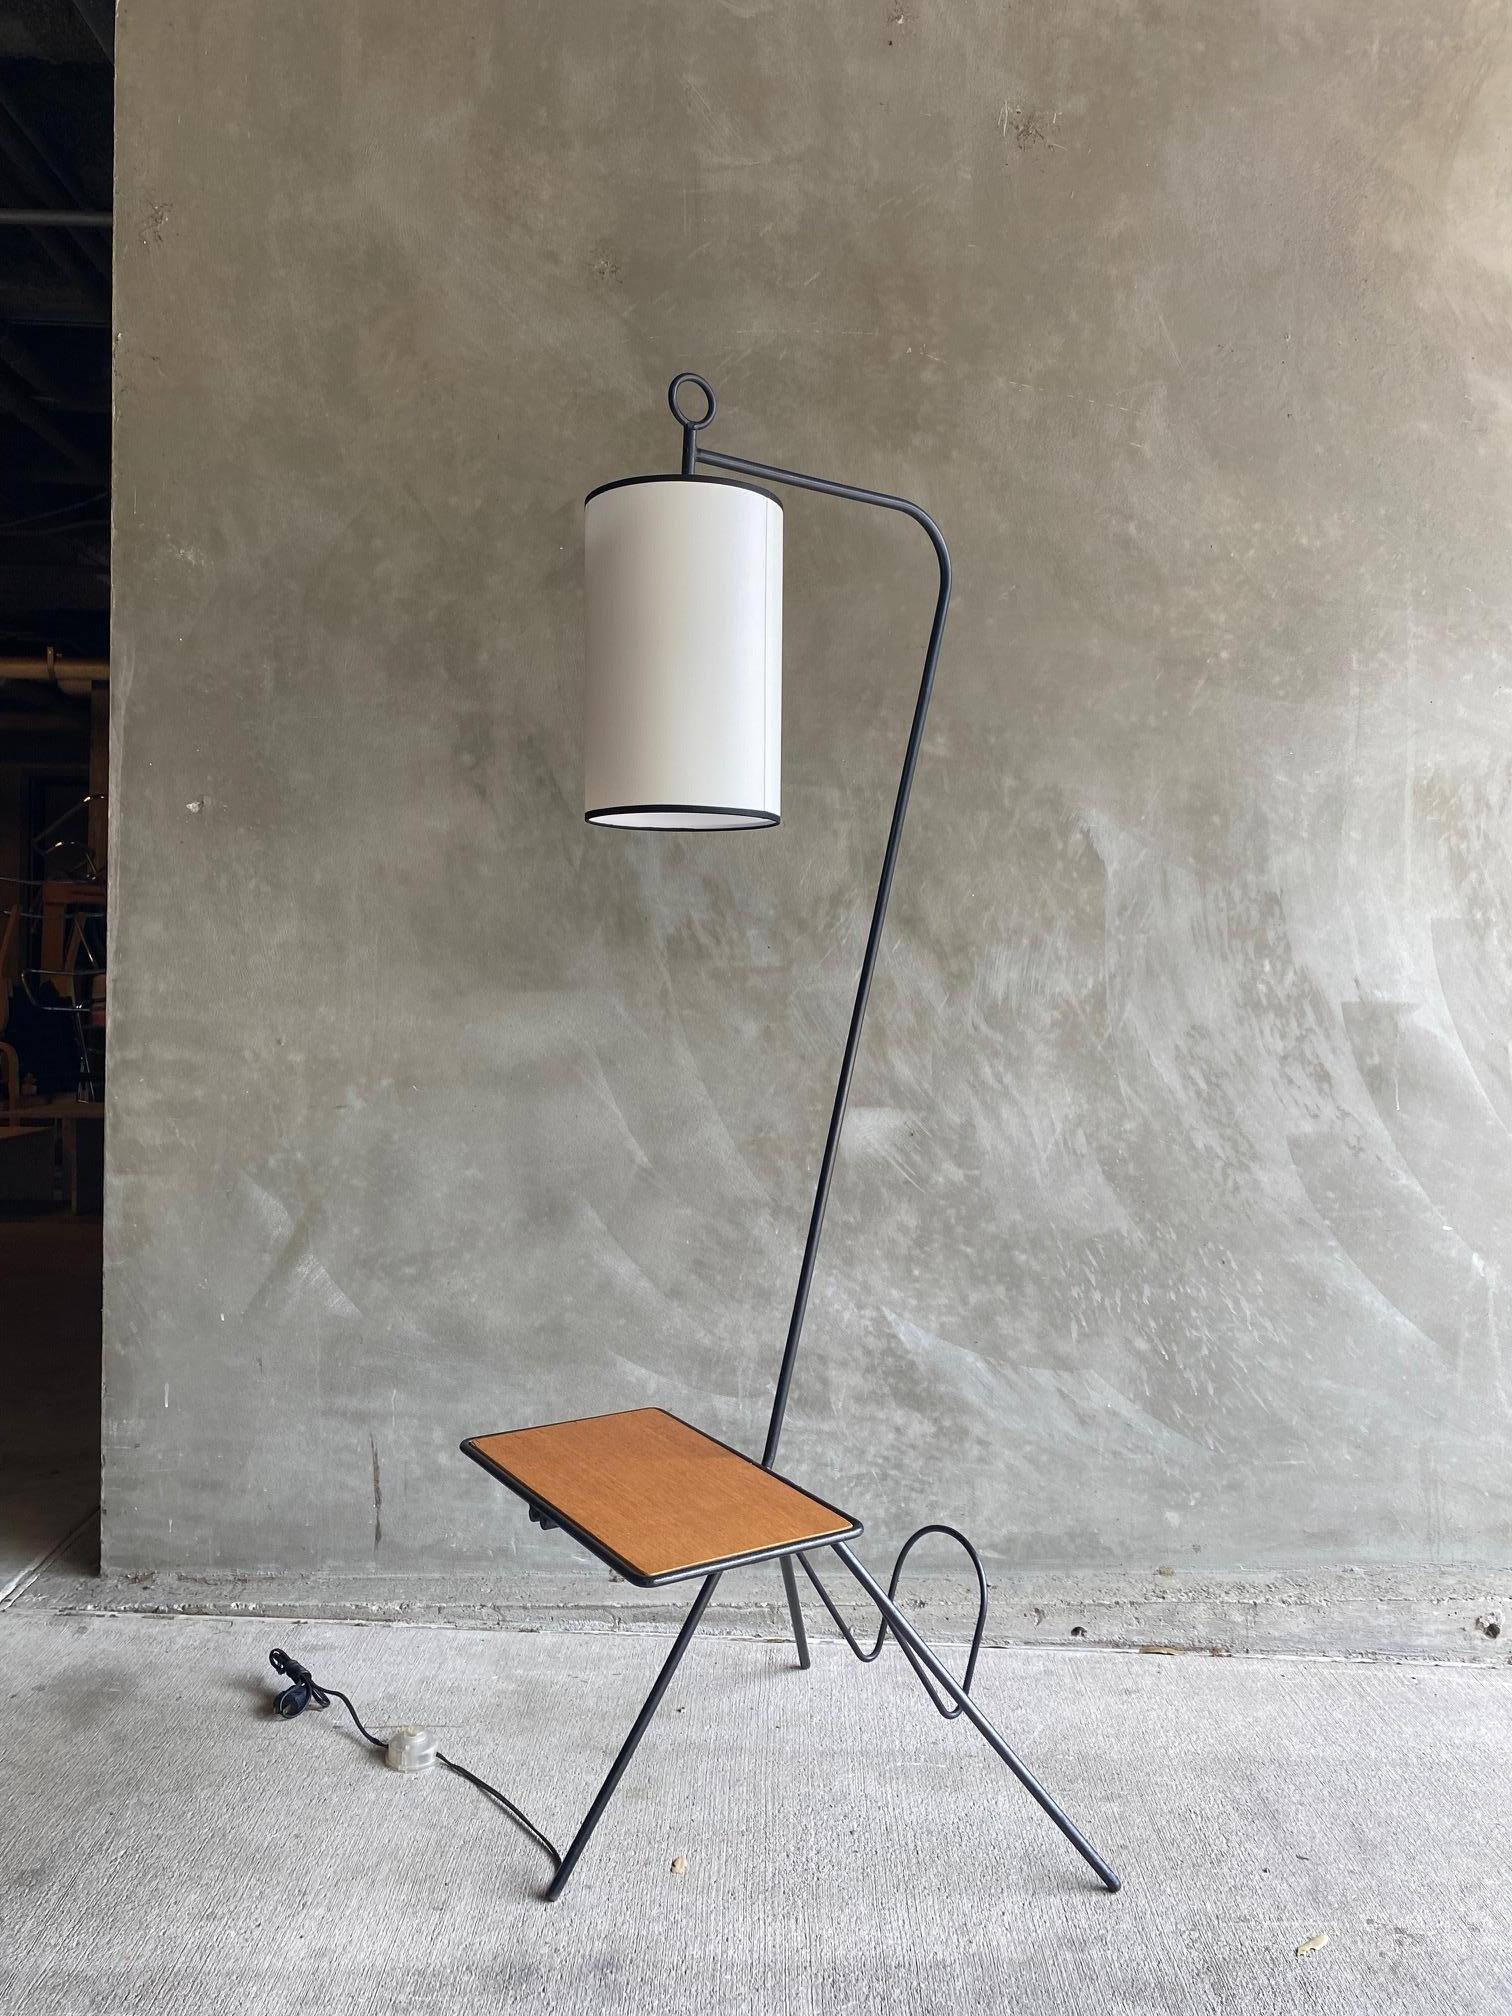 Tripod iron floor lamp with integrated table and magazine caddy. Solid iron frame with rattan detailing supports a natural wood inset table surface. Backside features a simple magazine or newspaper holder. New linen drum shade secures tightly.